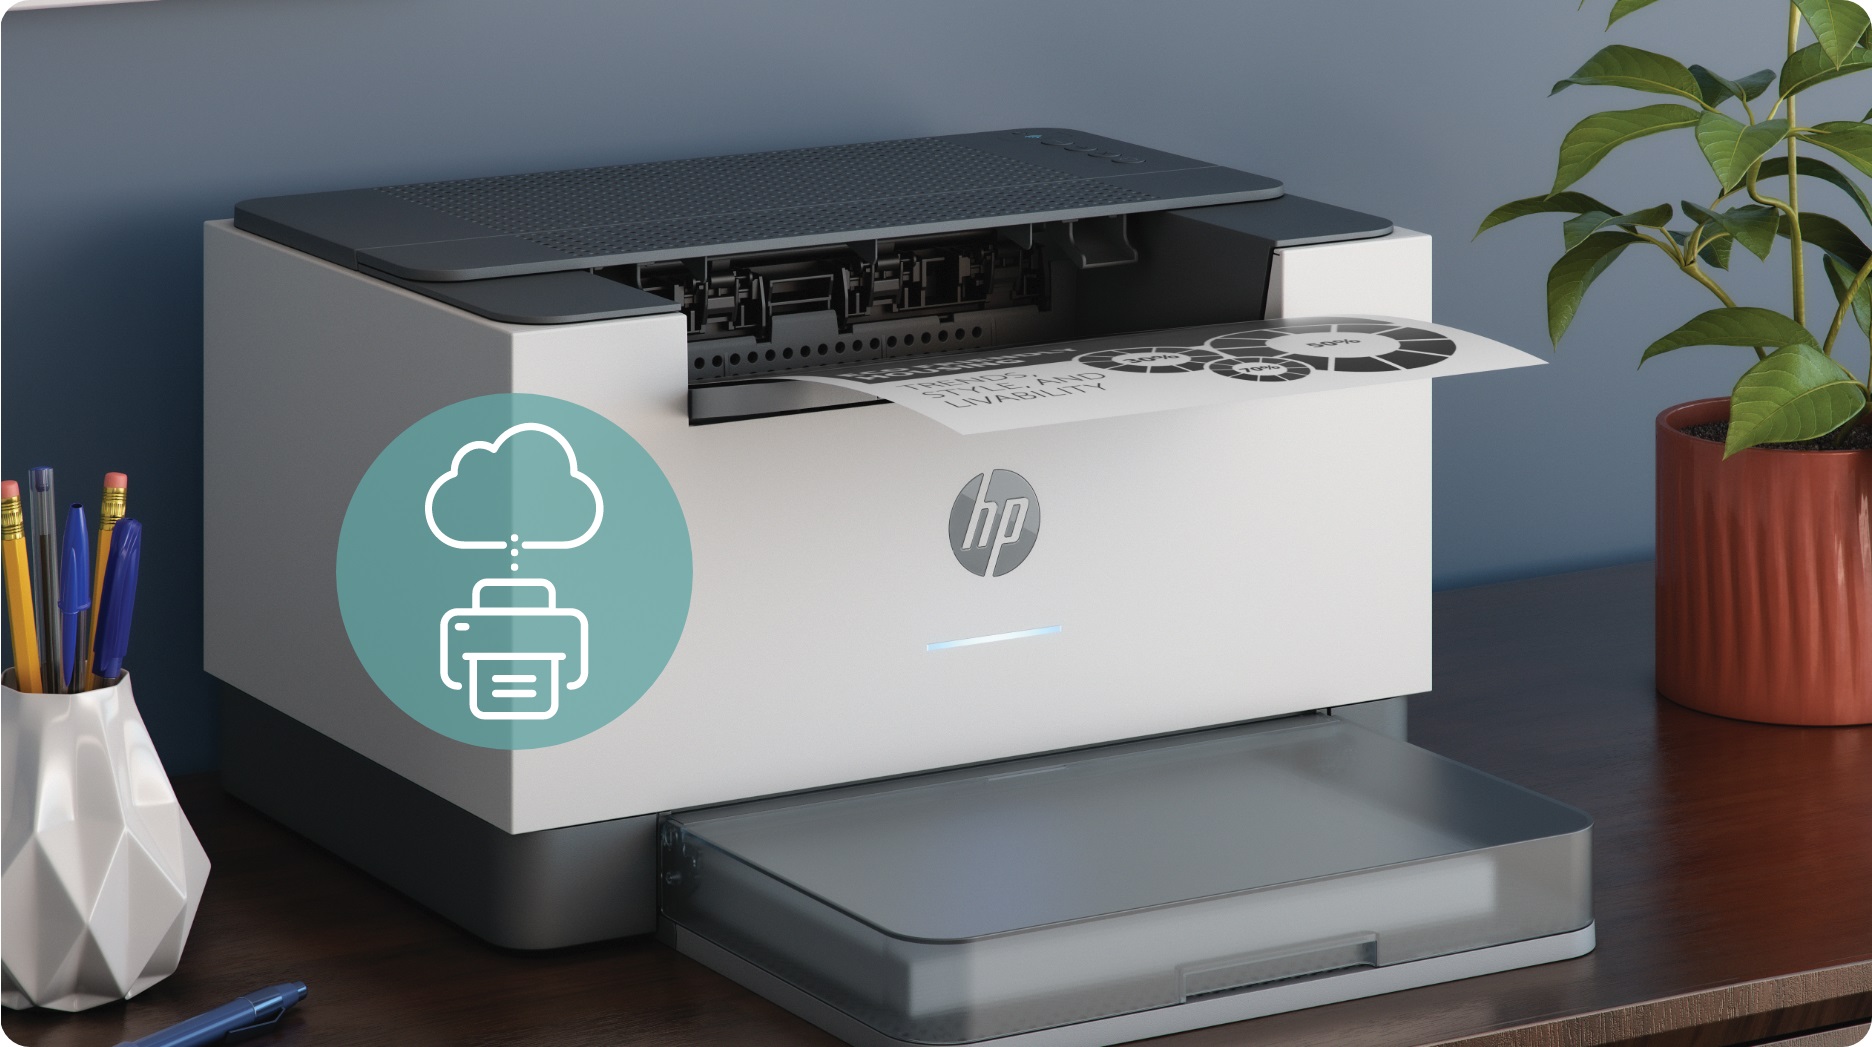 Hp Announces Global Launch Of Smartest Printing System